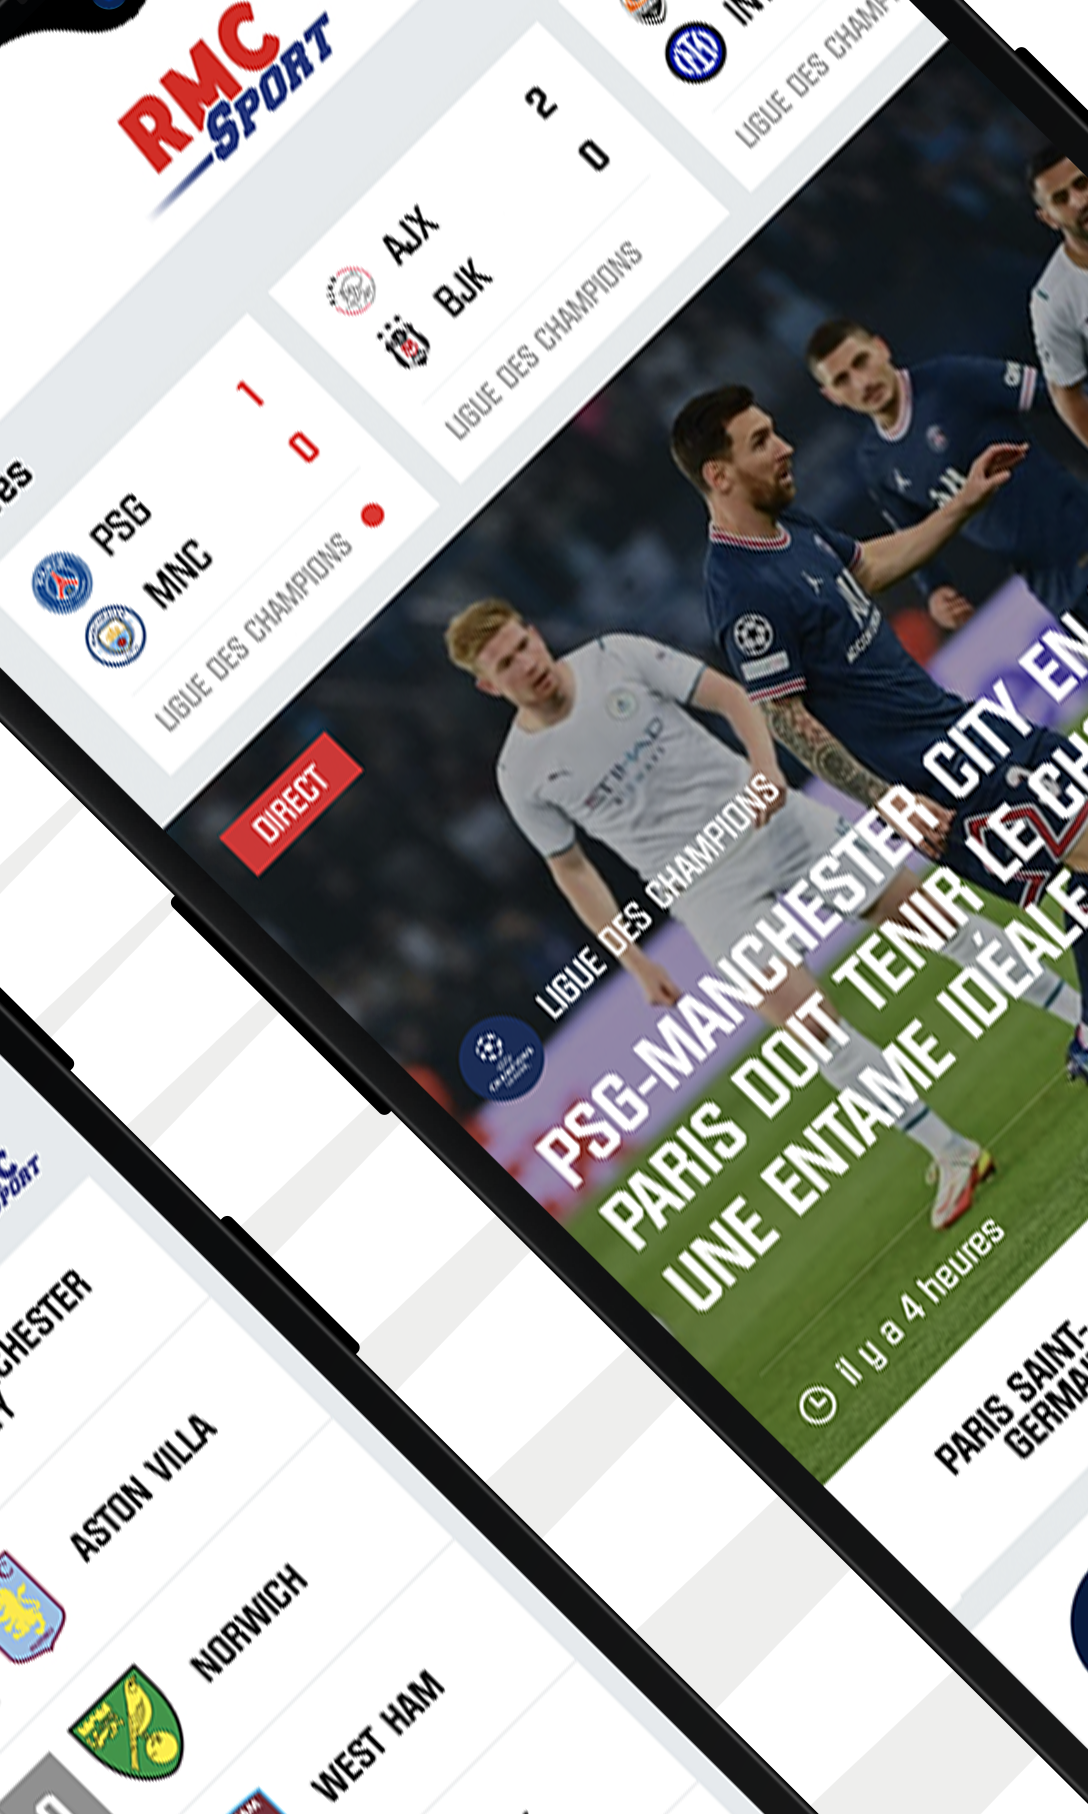 RMC Sport News, Résultats foot APK 6.0.0 for Android – Download RMC Sport  News, Résultats foot APK Latest Version from APKFab.com